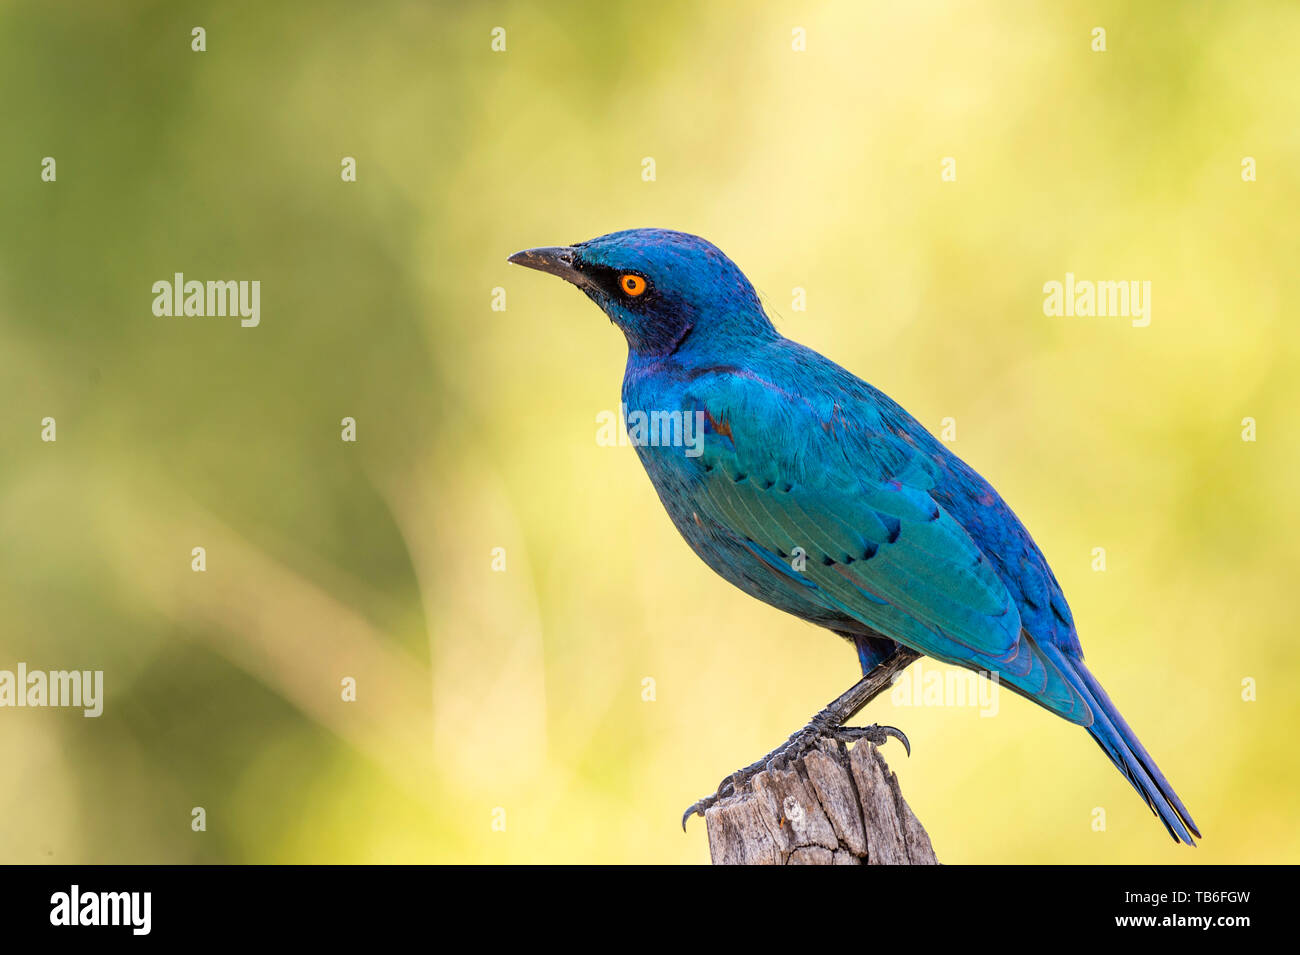 A Lesser blue eared glossy starling  Lamprotornis chloropterus seen in Zimbabwe's Hwange National Park. Stock Photo